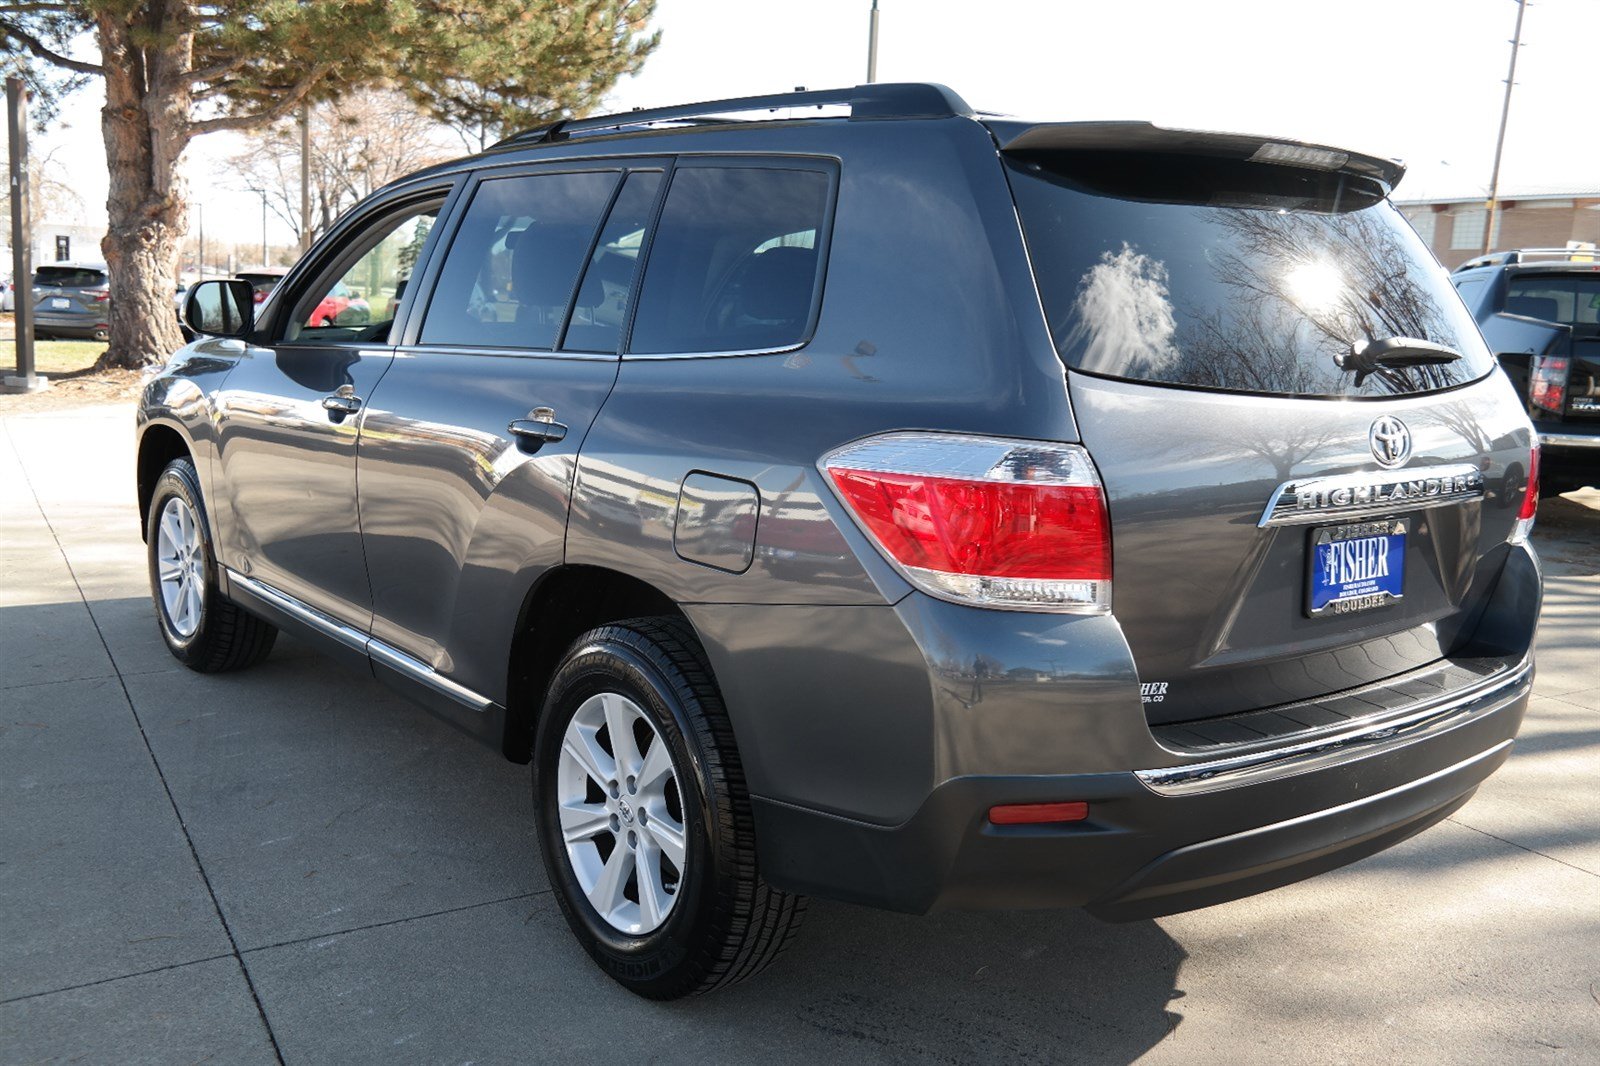 Pre-Owned 2013 Toyota Highlander FWD 4dr I4 Plus Sport Utility in ...